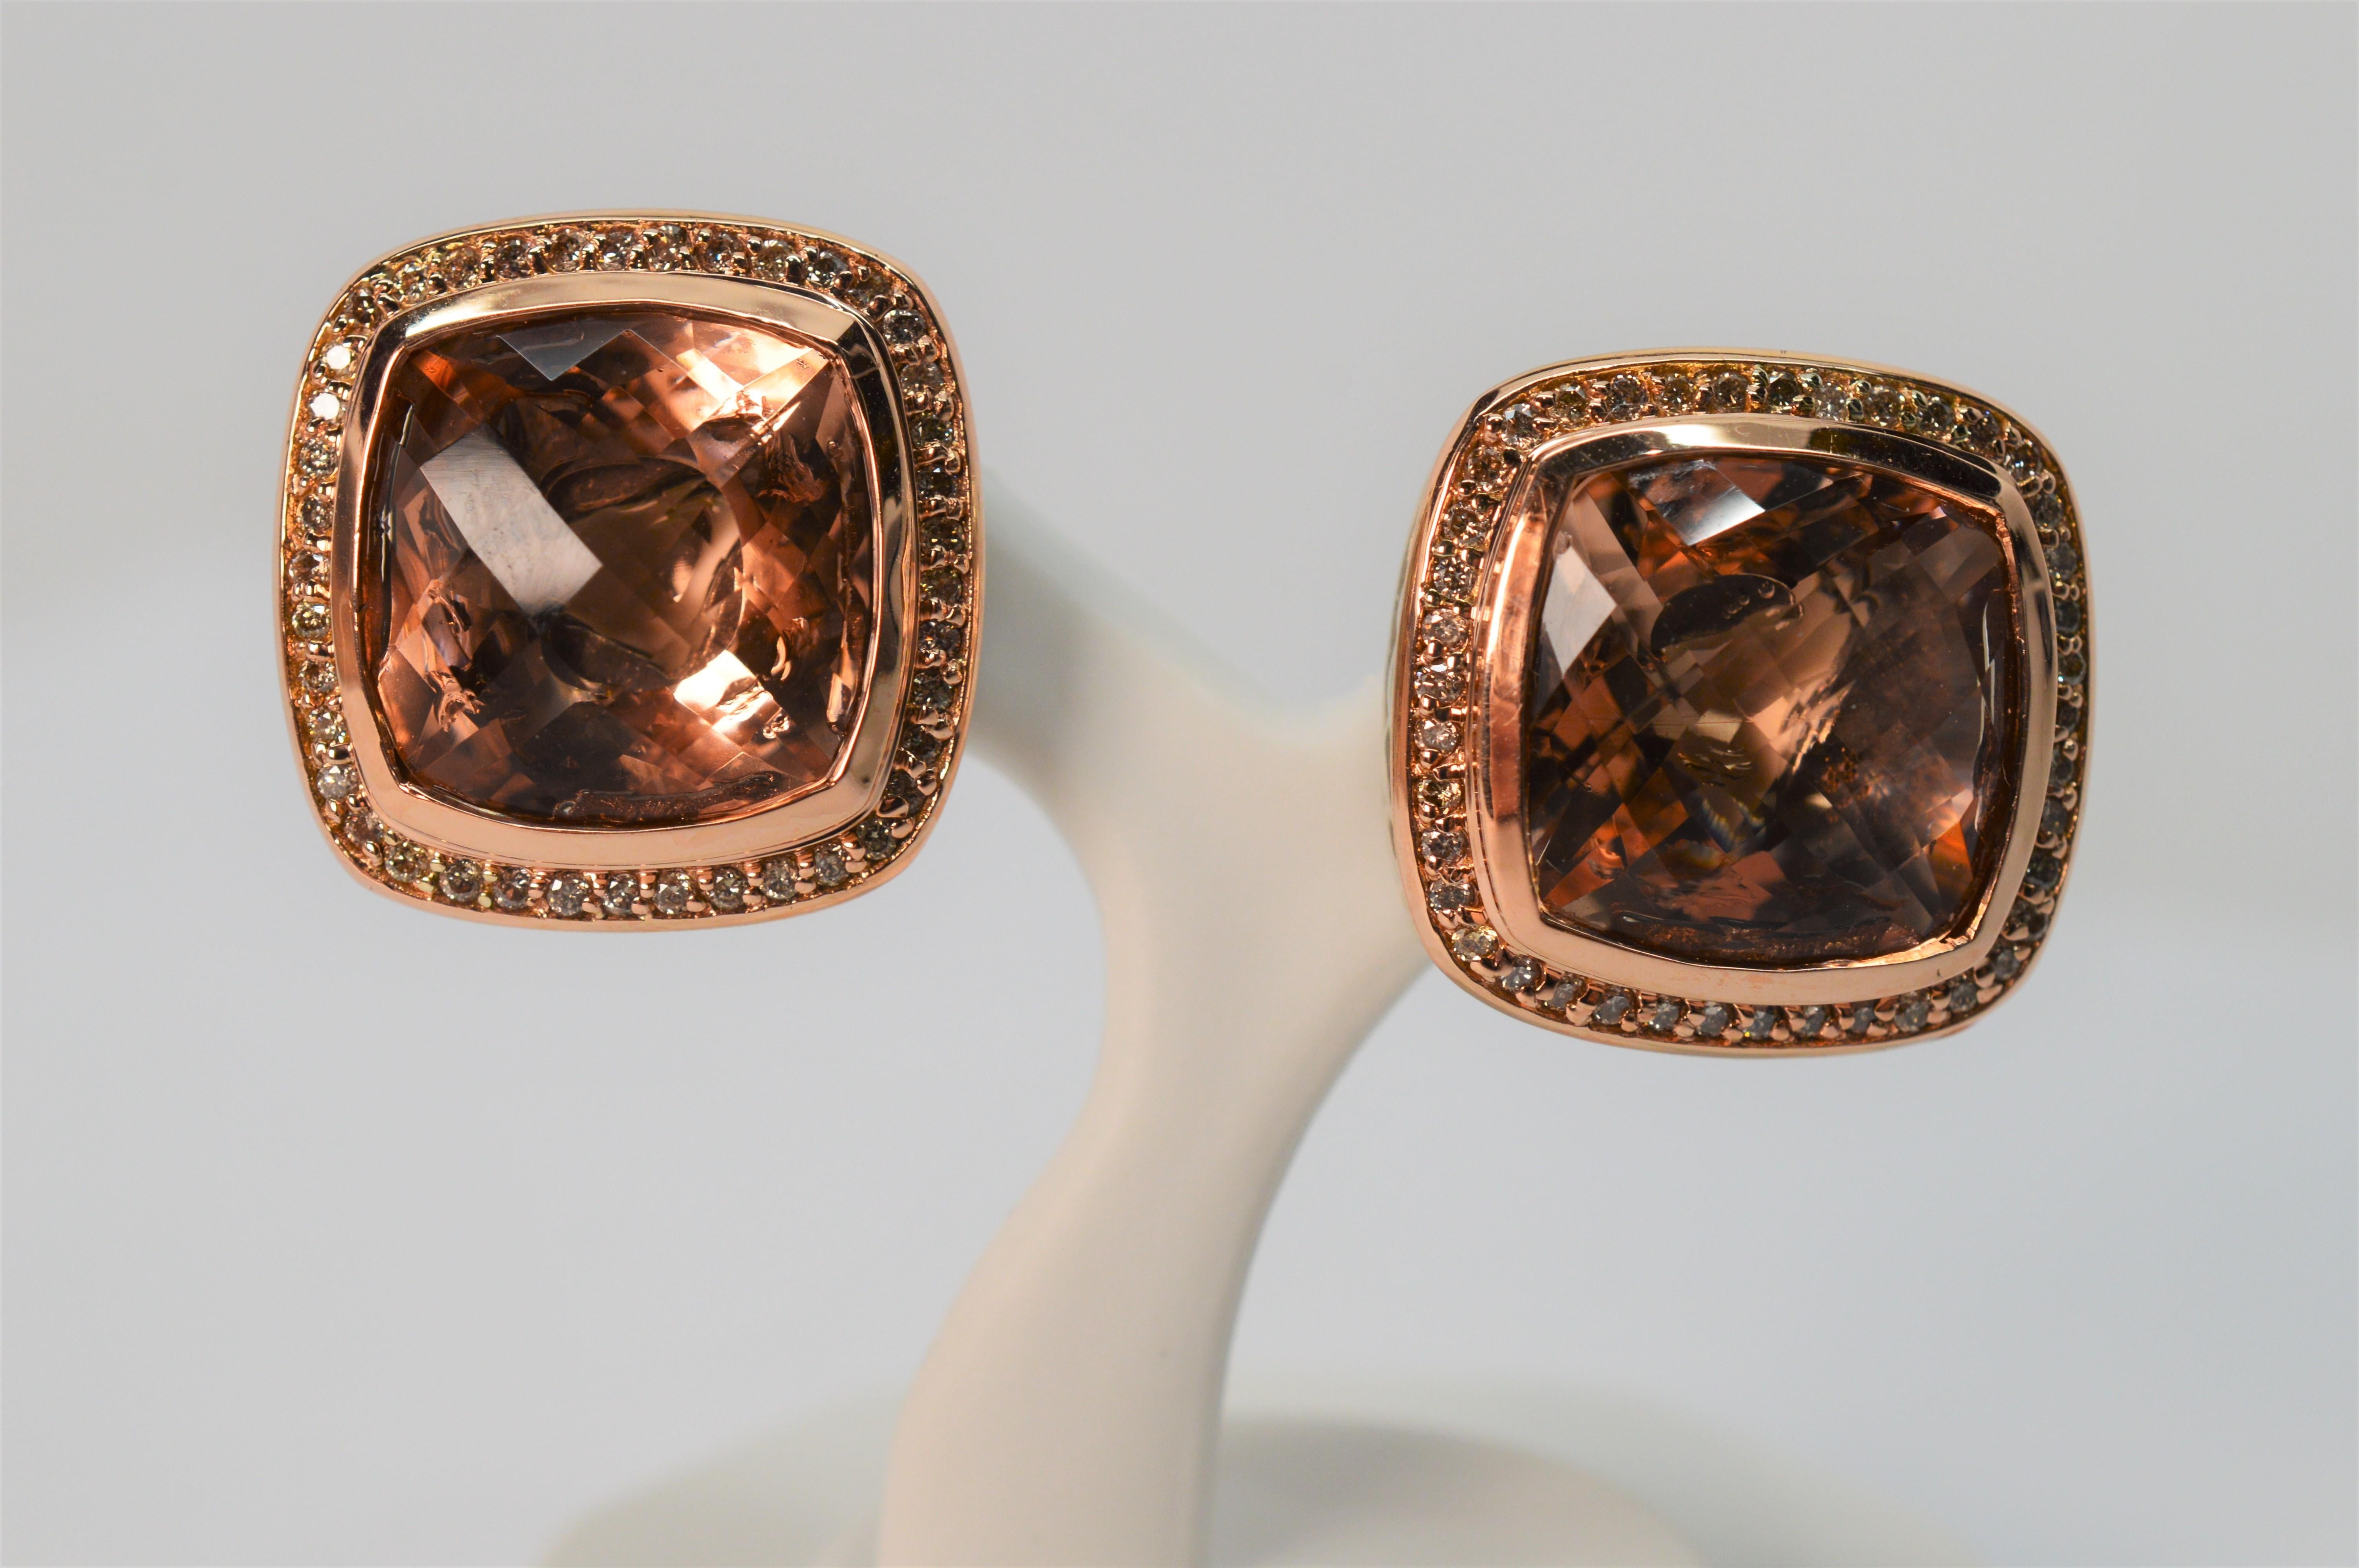 By well known designer David Yurman, enjoy this beautiful vintage pair of DY Champagne Morganite Earrings in sterling silver with diamonds and rose gold accents. 
For pierced ears with a post and omega clip, this large size 19mm square earring pair